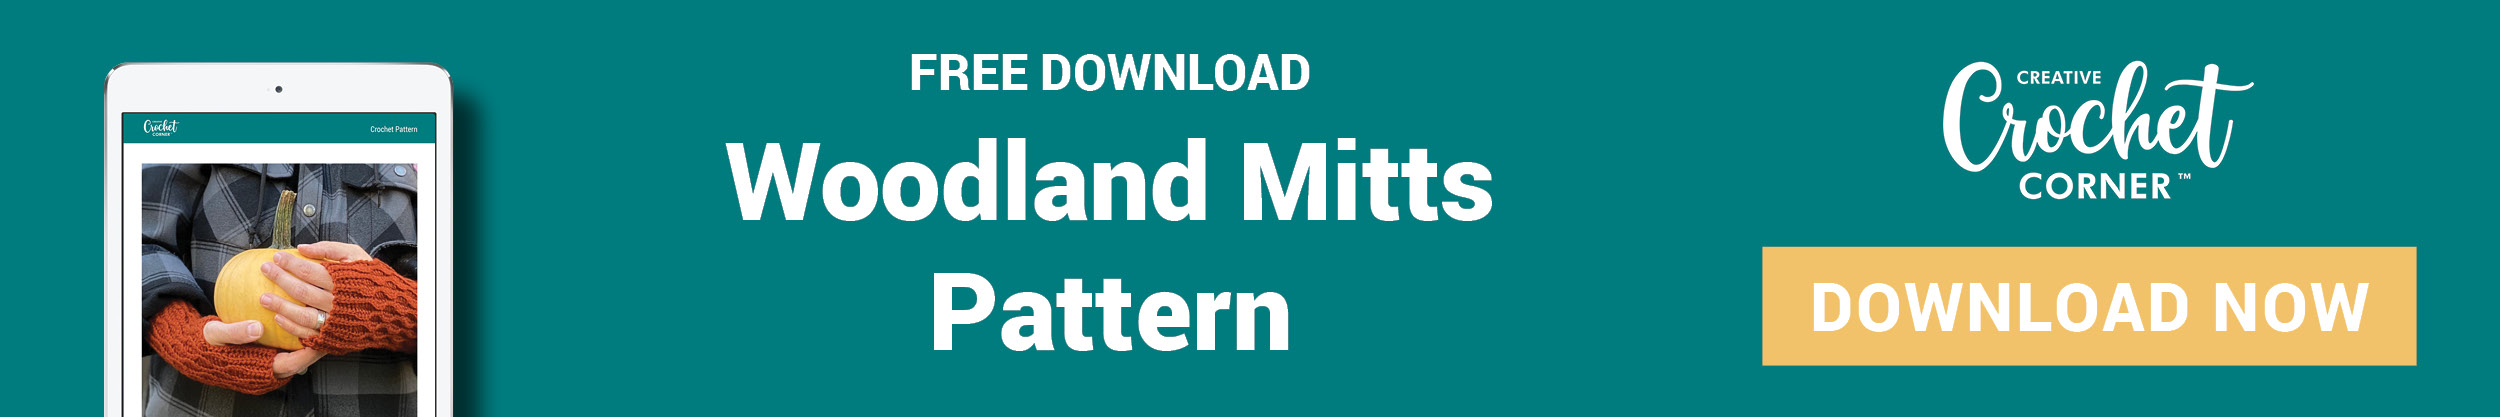 Download the free Woodland Mitts Pattern